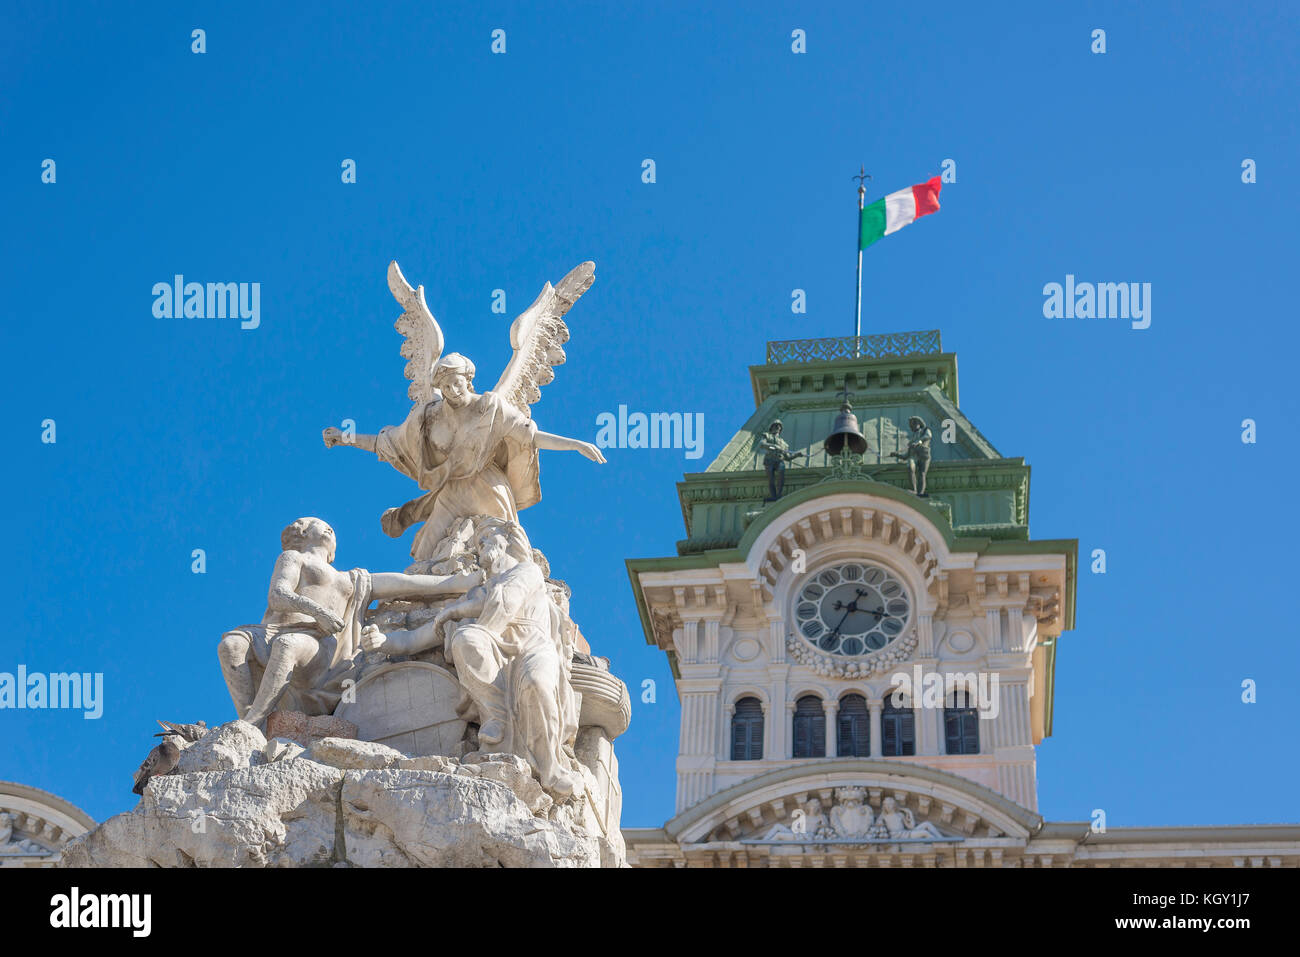 Trieste city, detail of the angel statue on top of the Fountain of Four Continents and the Town Hall clock tower, Piazza dell Unita d'Italia, Trieste. Stock Photo